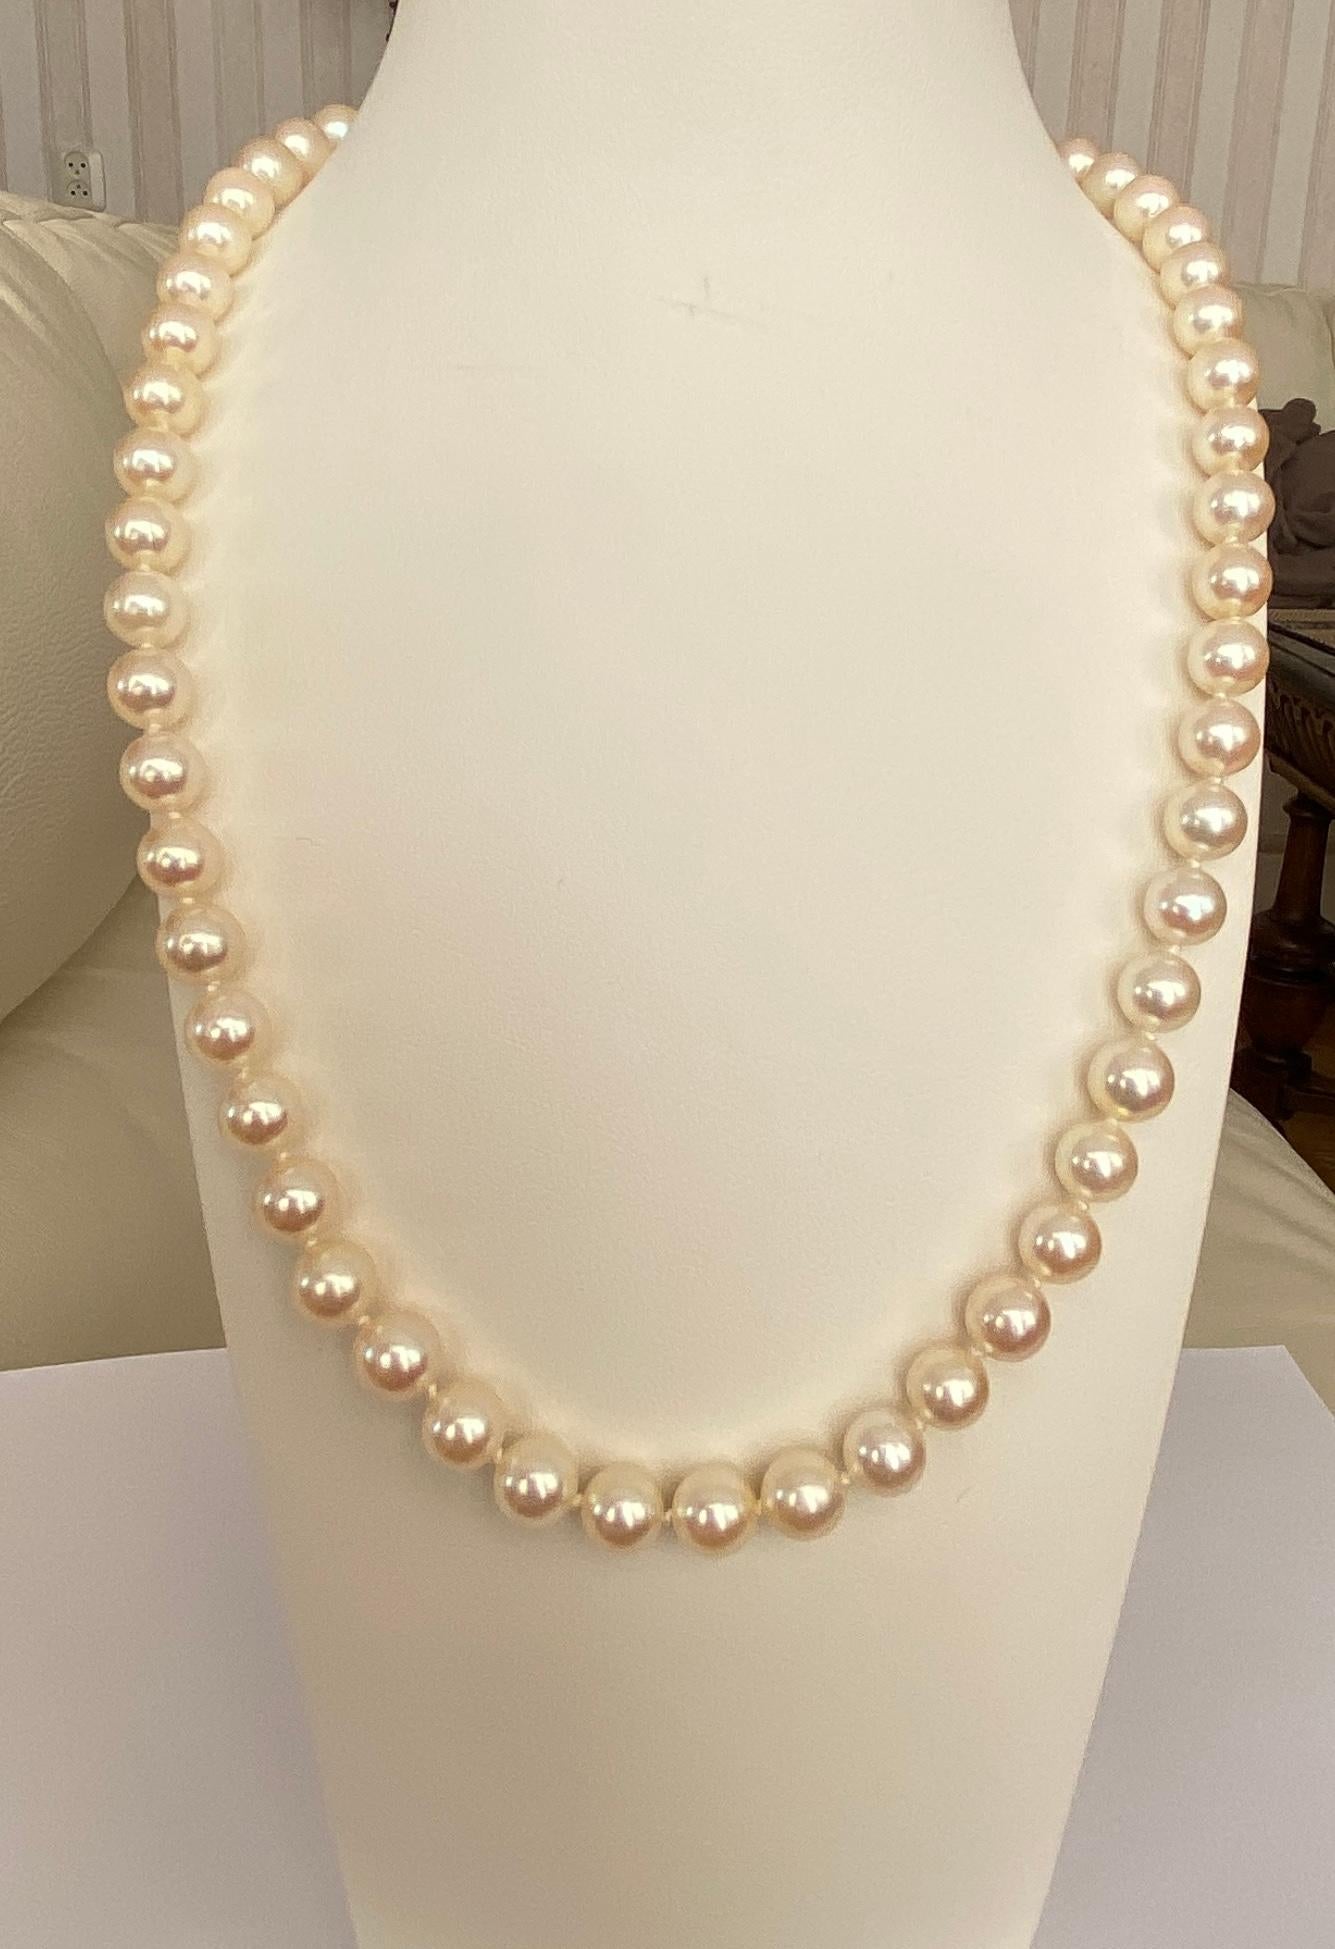 Renaissance Akoya pearl necklace with 18 kt white gold clasp and one diamond